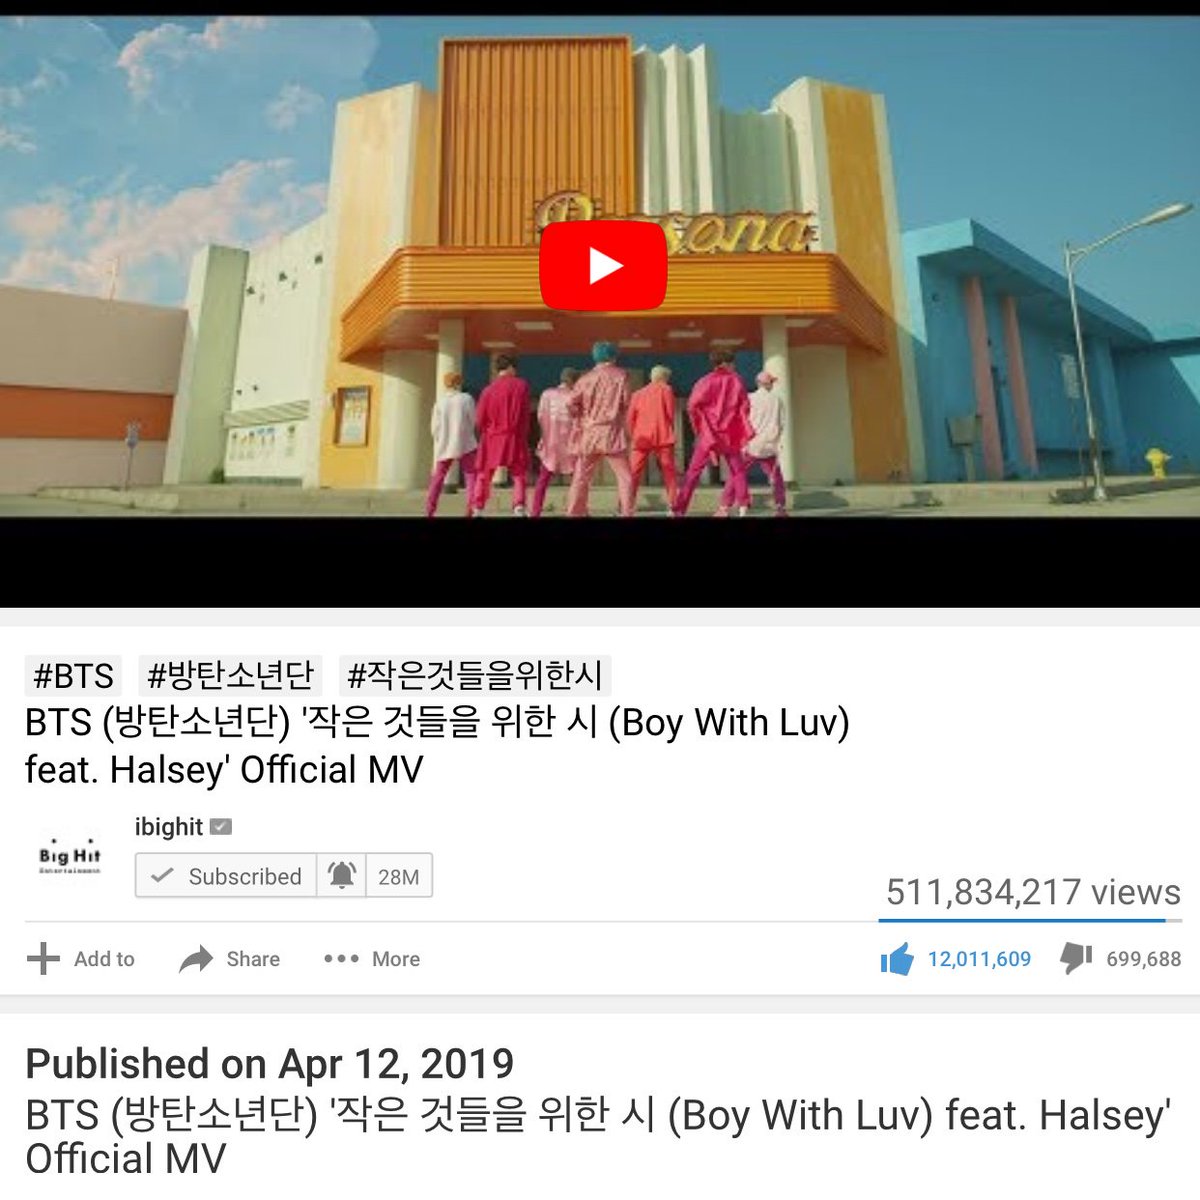 ᴮᴱbts Worldwide On Twitter New Record Bts Boy With Luv Becomes The First K Group Music Video To Surpass 12 Million Likes On Youtube It S Now 11 Most Liked Mv Of All Times - bts boy with luv roblox id code